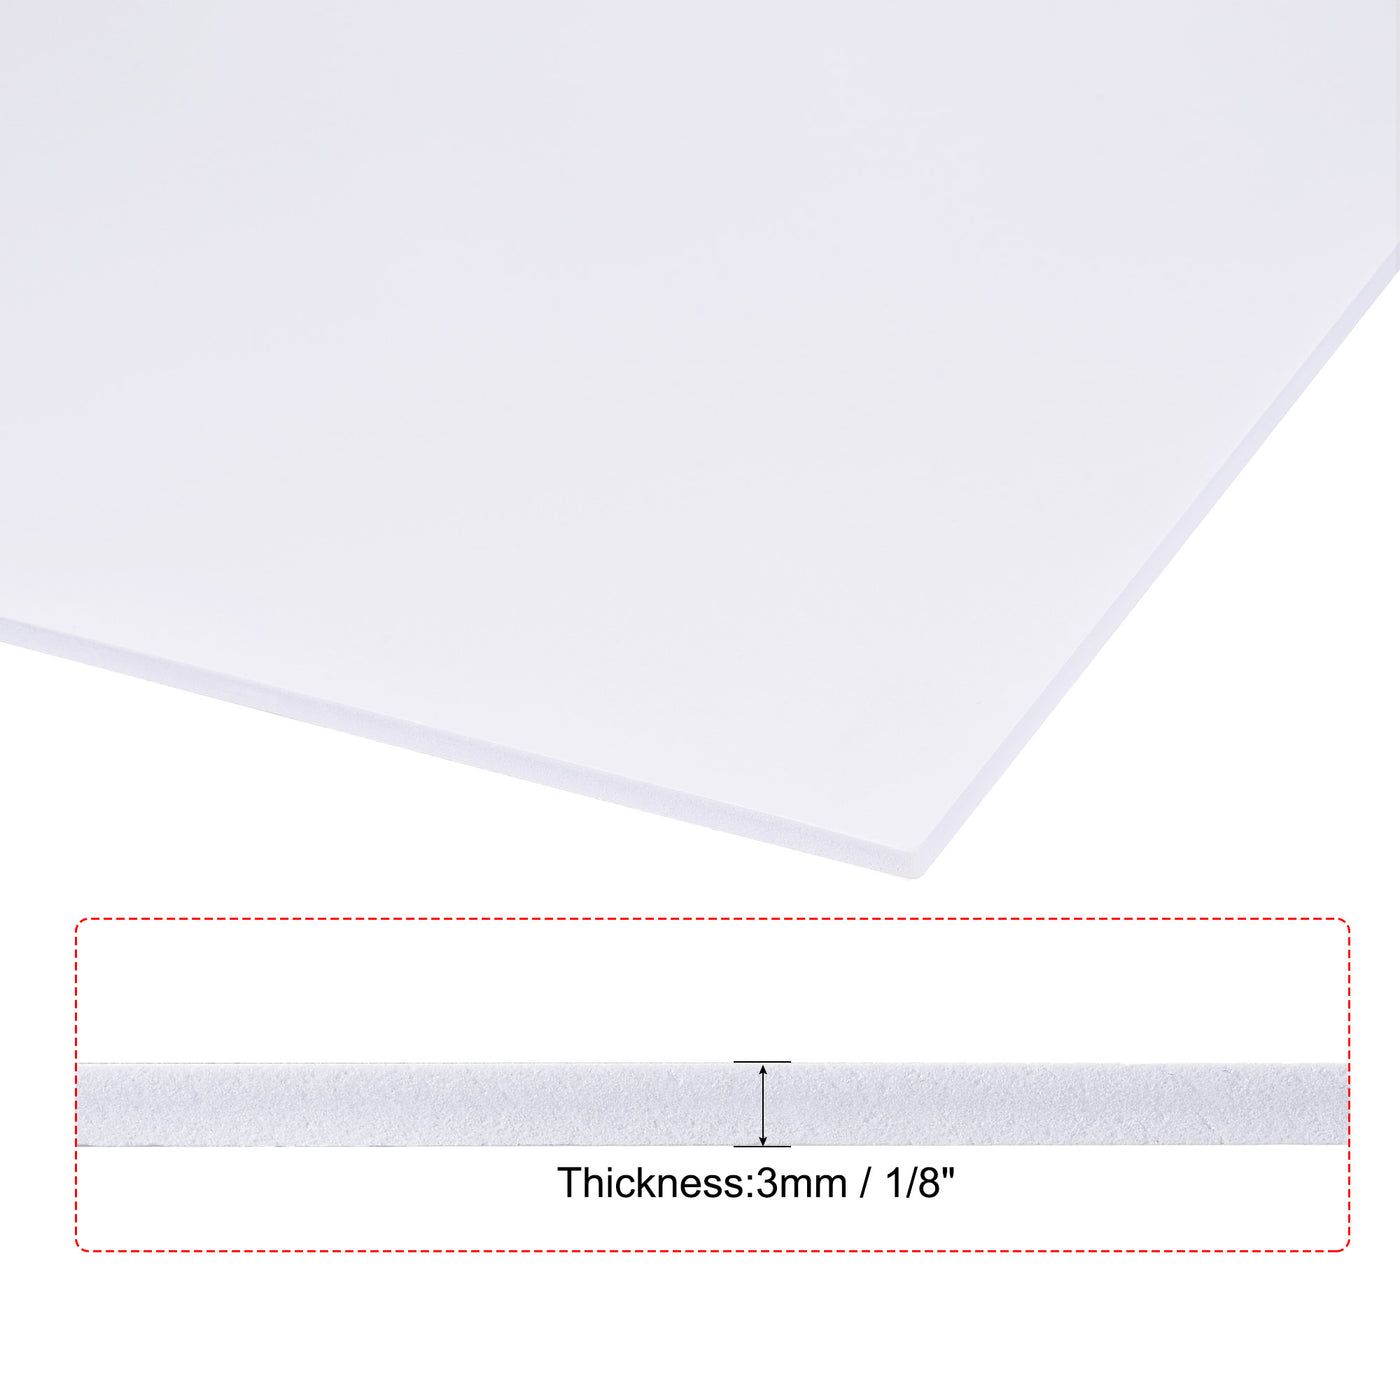 uxcell Uxcell PVC Foam Board Sheet,3mm x 300mm x 300mm,White,Double Sided,Expanded PVC Sheet